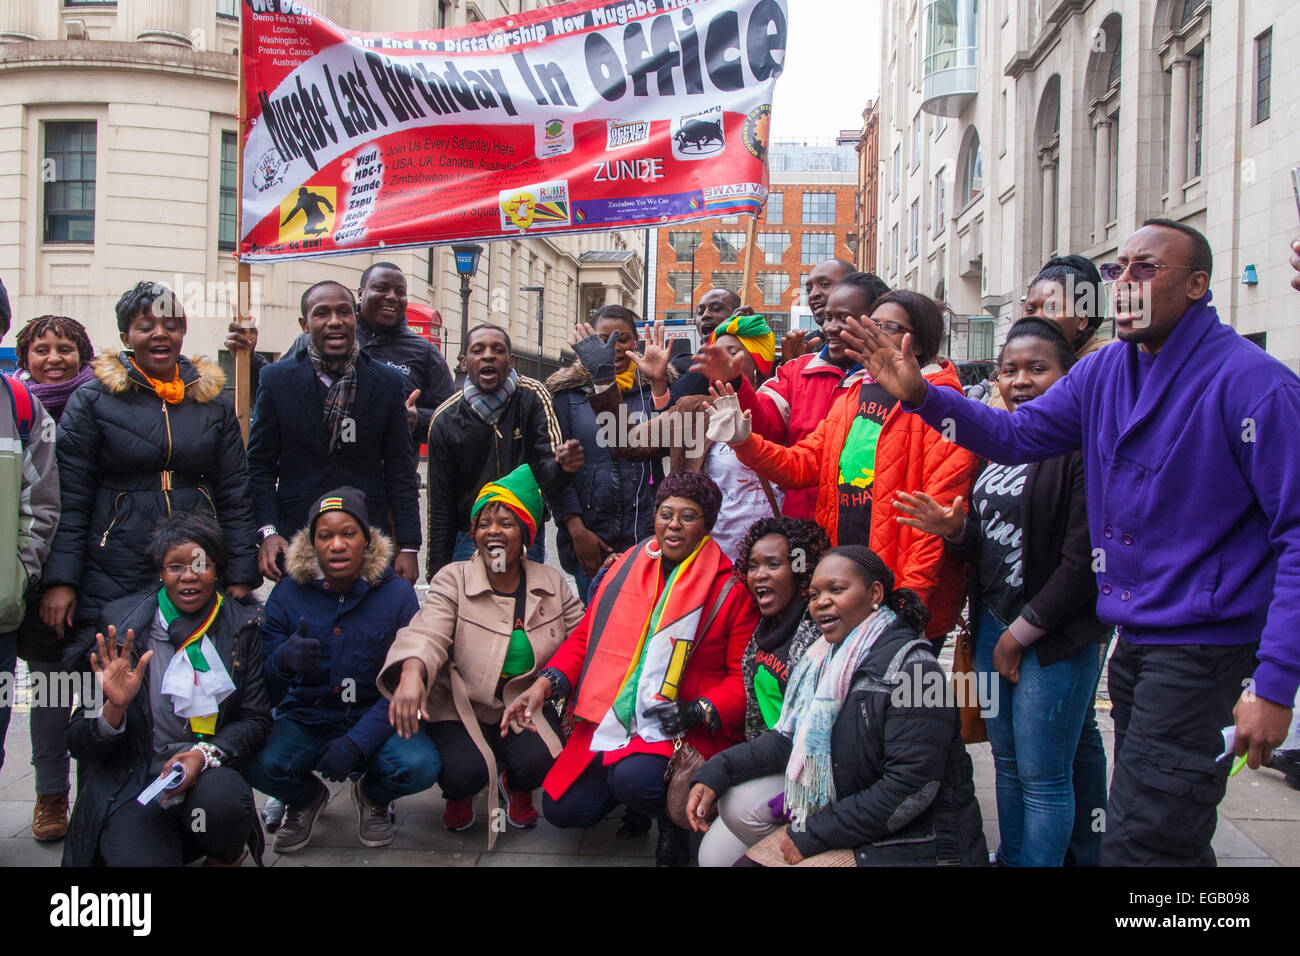 London, UK. 21st February, 2015. Dozens of exiled Zimbabweans gather outside their embassy in London proclaiming Mugabe's last birthday in office. Singing and dancing as they have done every Saturday since 2002, the group spoke with passersby and added yet more names to their petition. PICTURED: Zimbabwe Vigil protesters pose with a banner proclaiming this birthday - his 91st - is Mugabe's last in office. Credit:  Paul Davey/Alamy Live News Stock Photo